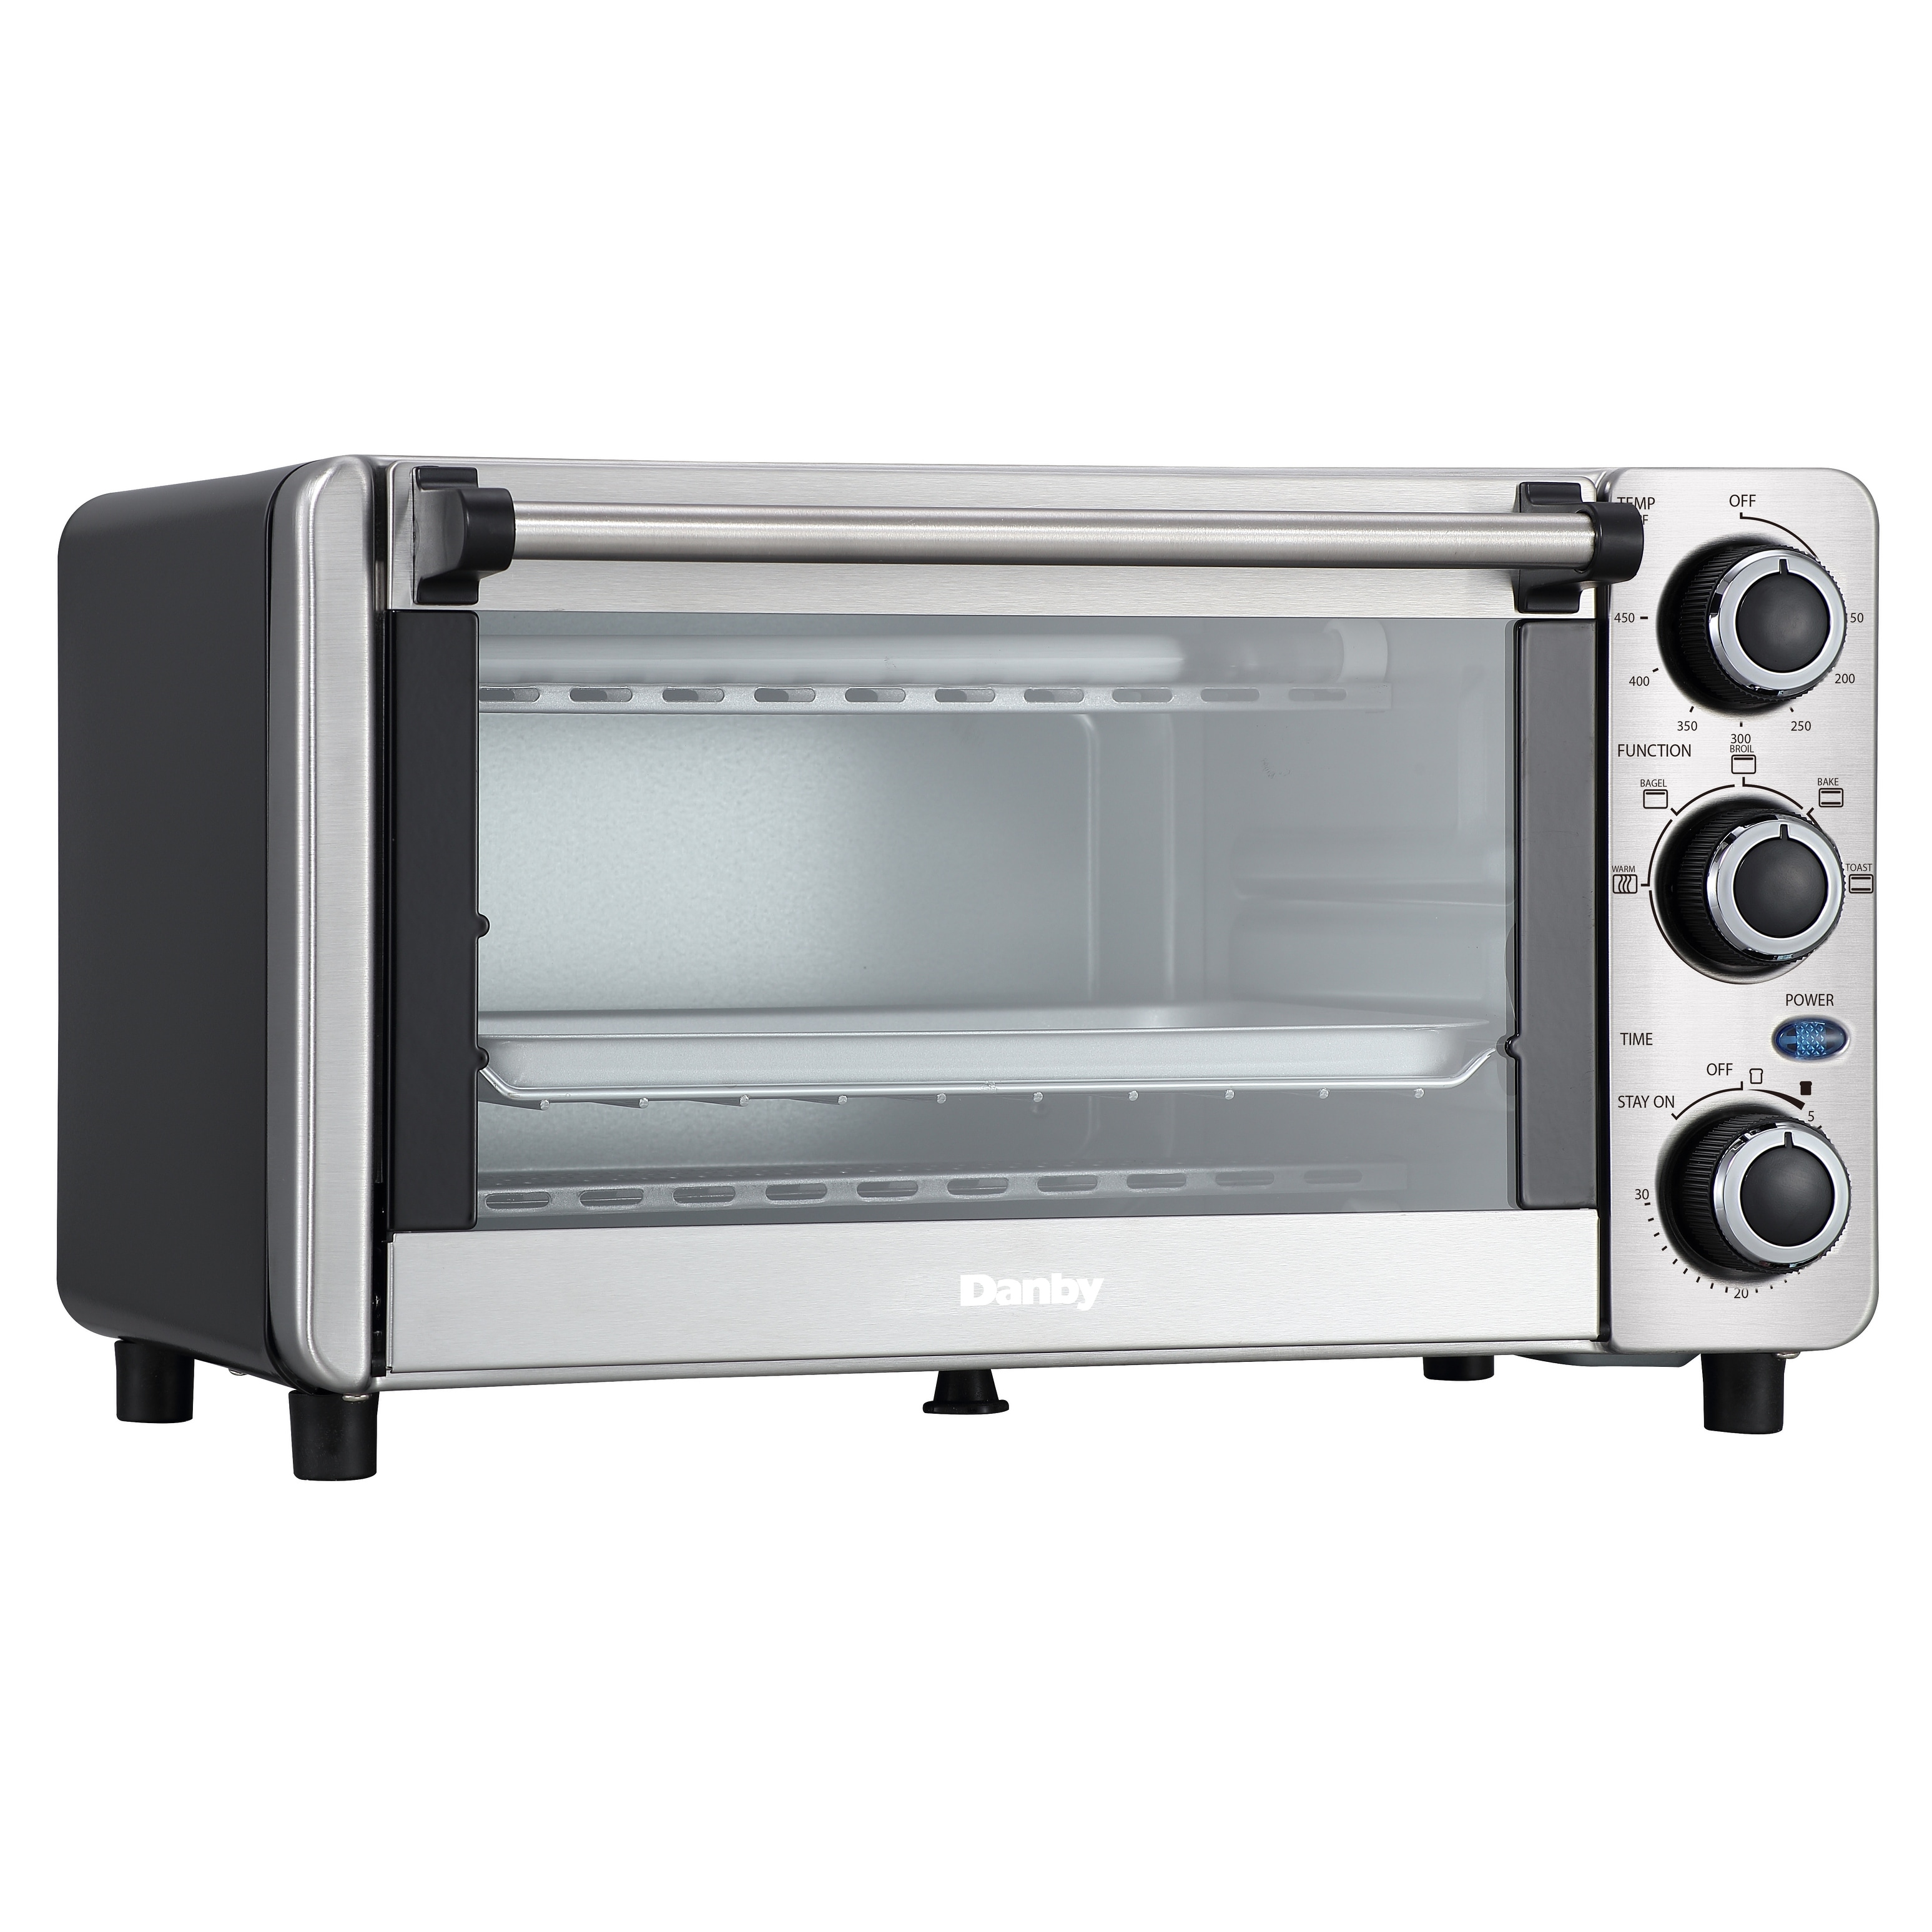 Danby 0.4 cu ft/12L 4 Slice Countertop Toaster Oven in Stainless Steel